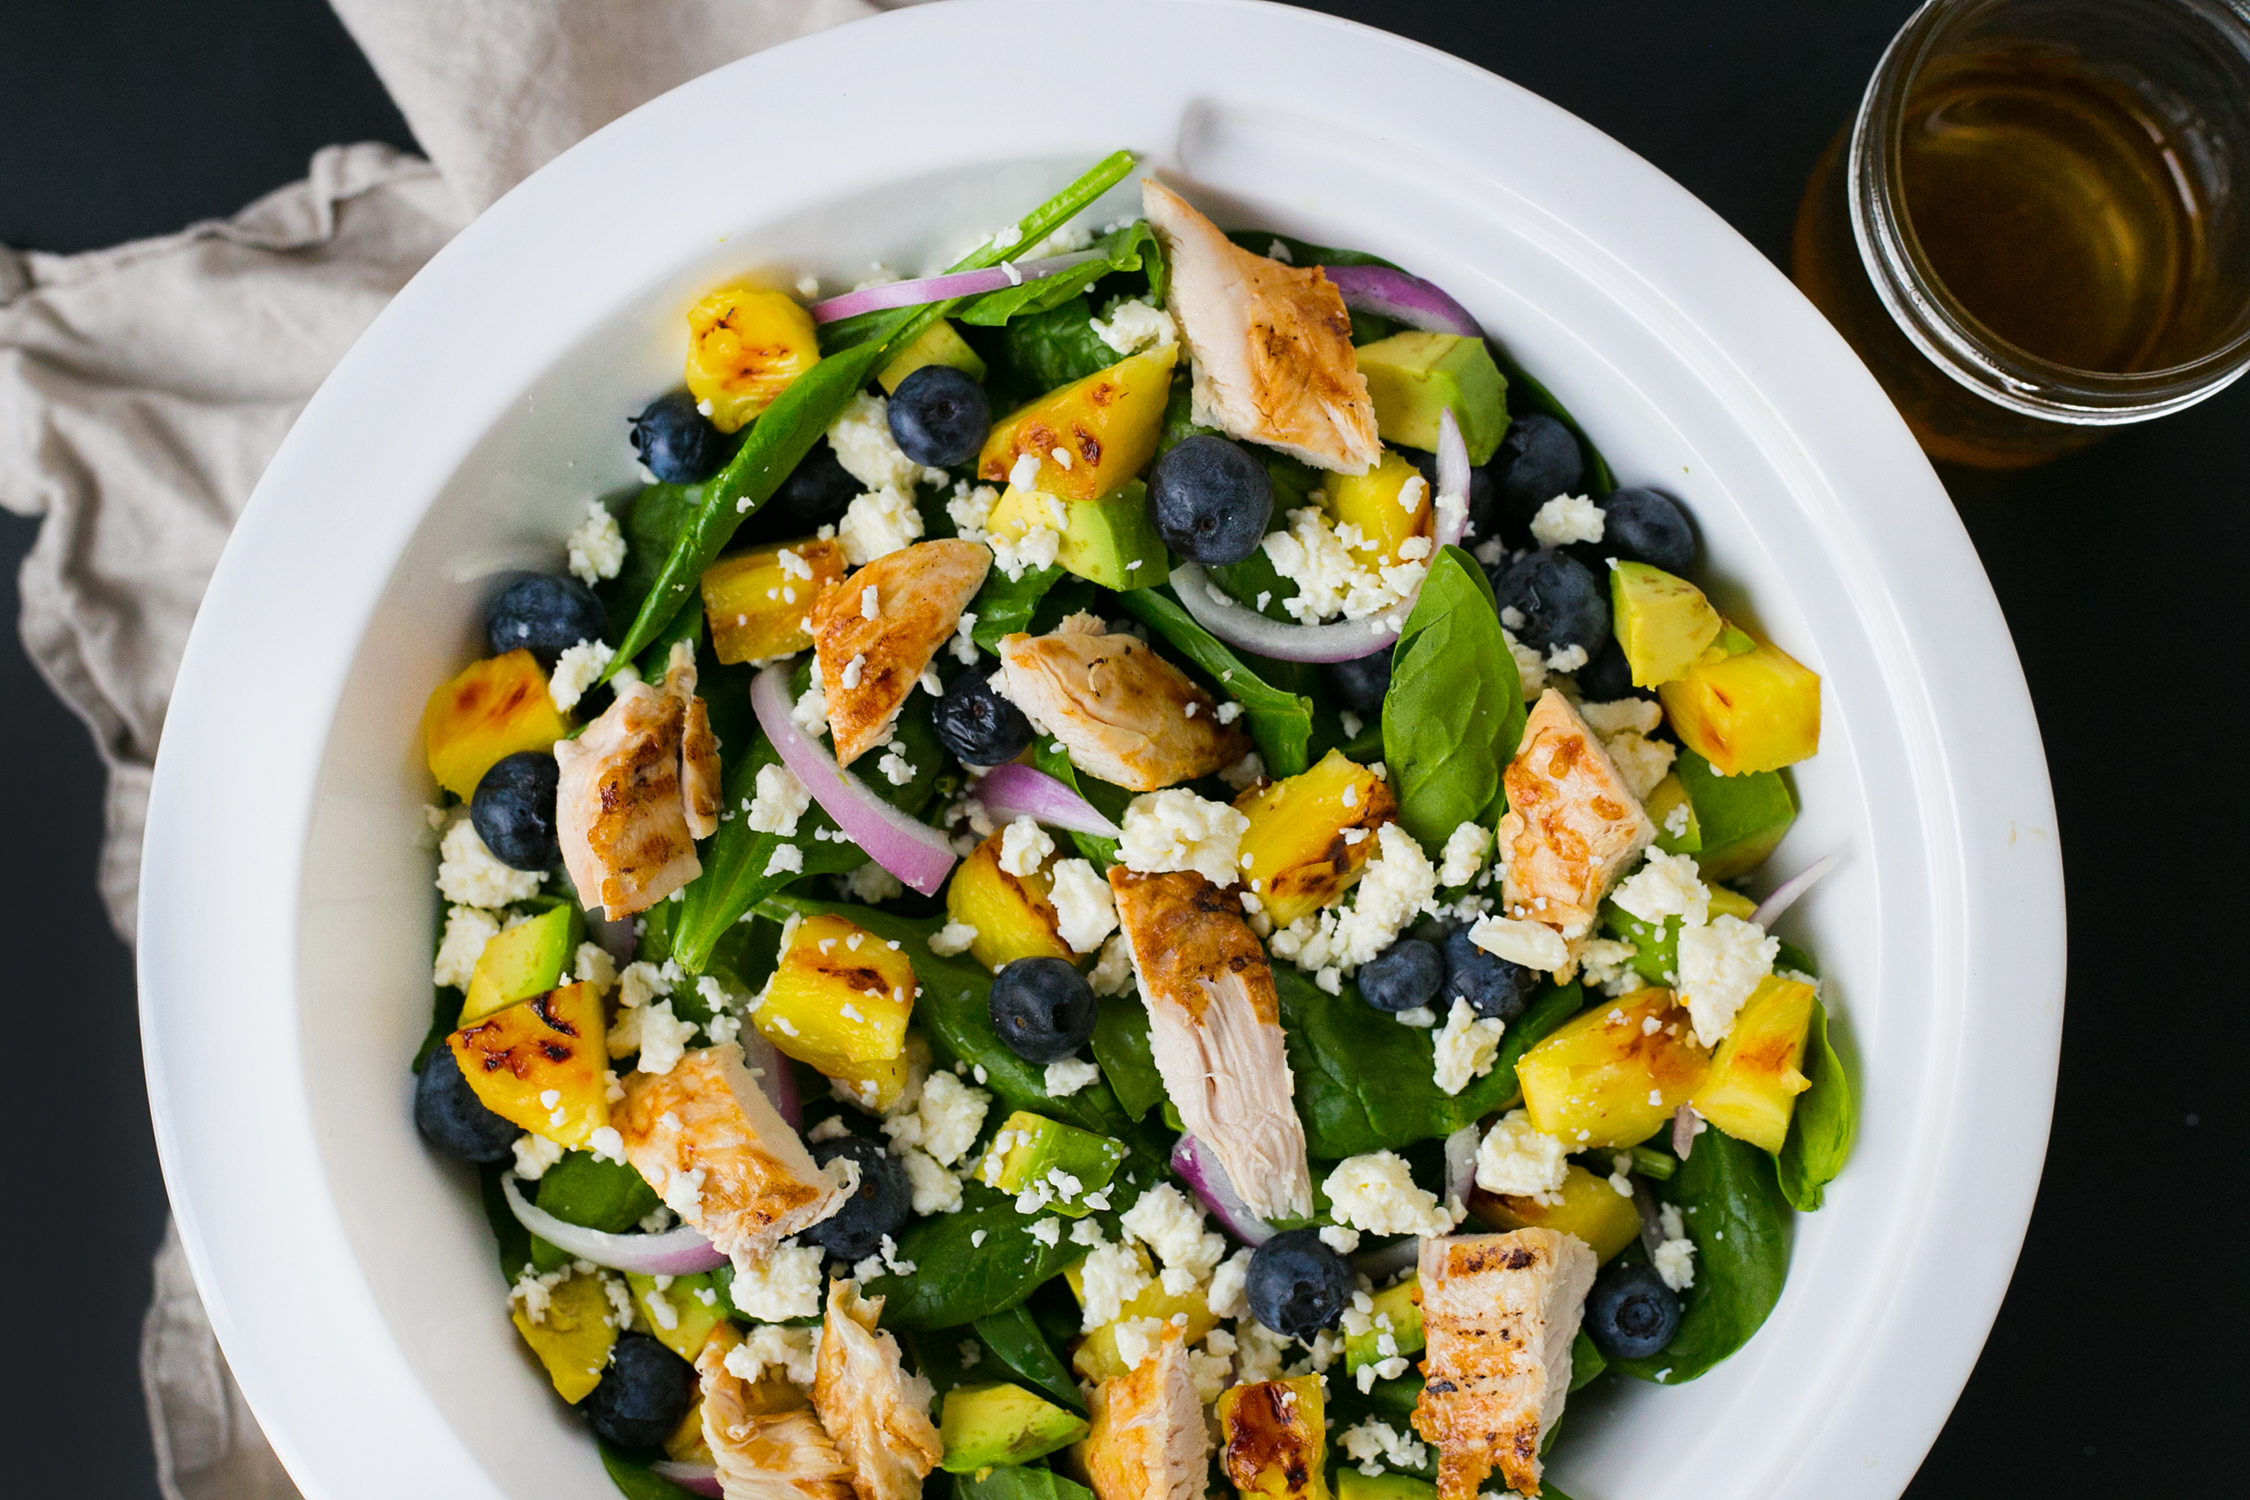 Nutrition Planning for Clients with Cancer Featuring Cathy Biase:Grilled Chicken Salad